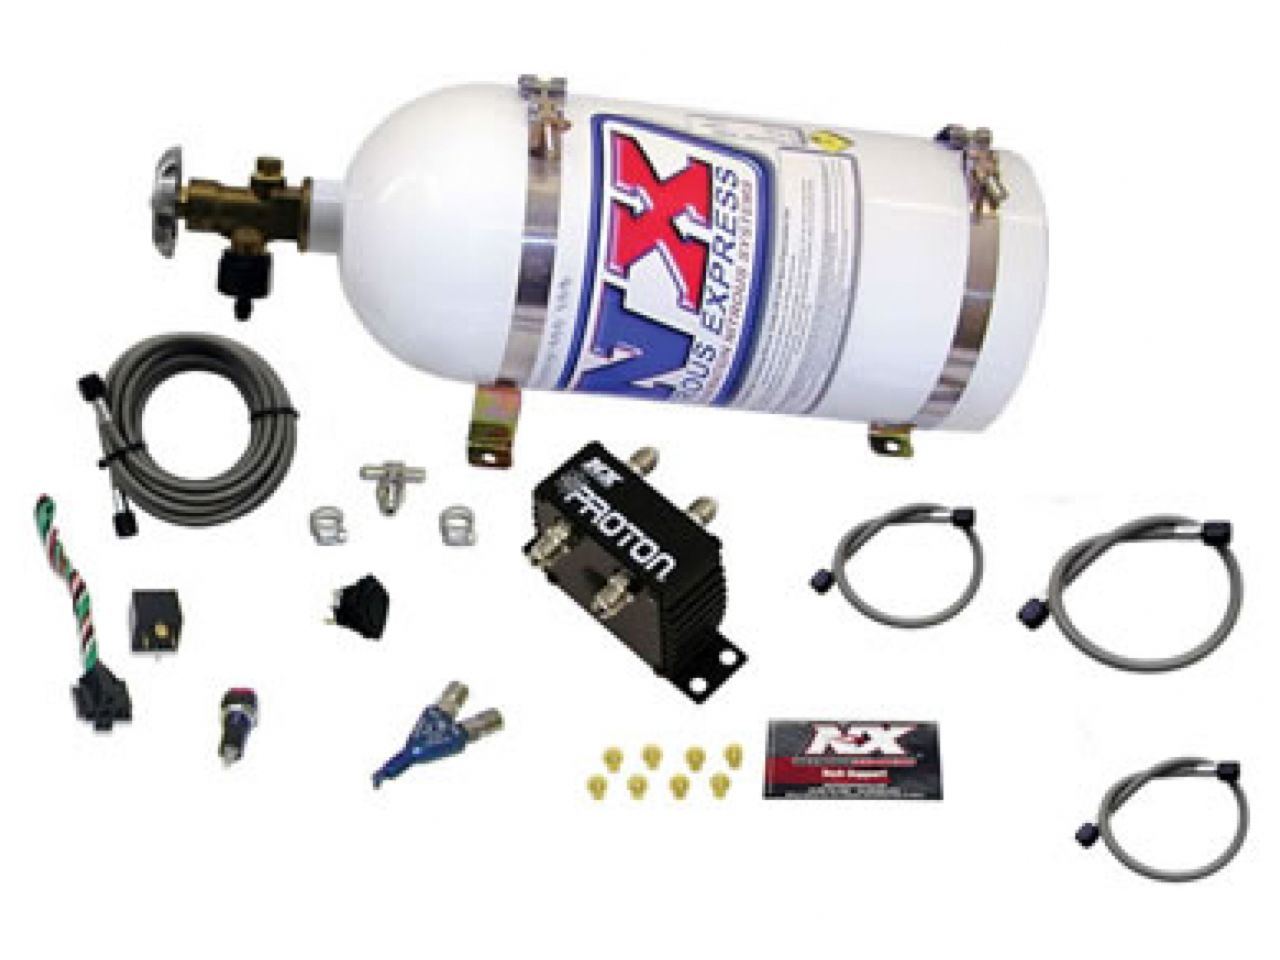 Nitrous Express Nitrous Oxide Kits and Accessories 20420-10 Item Image